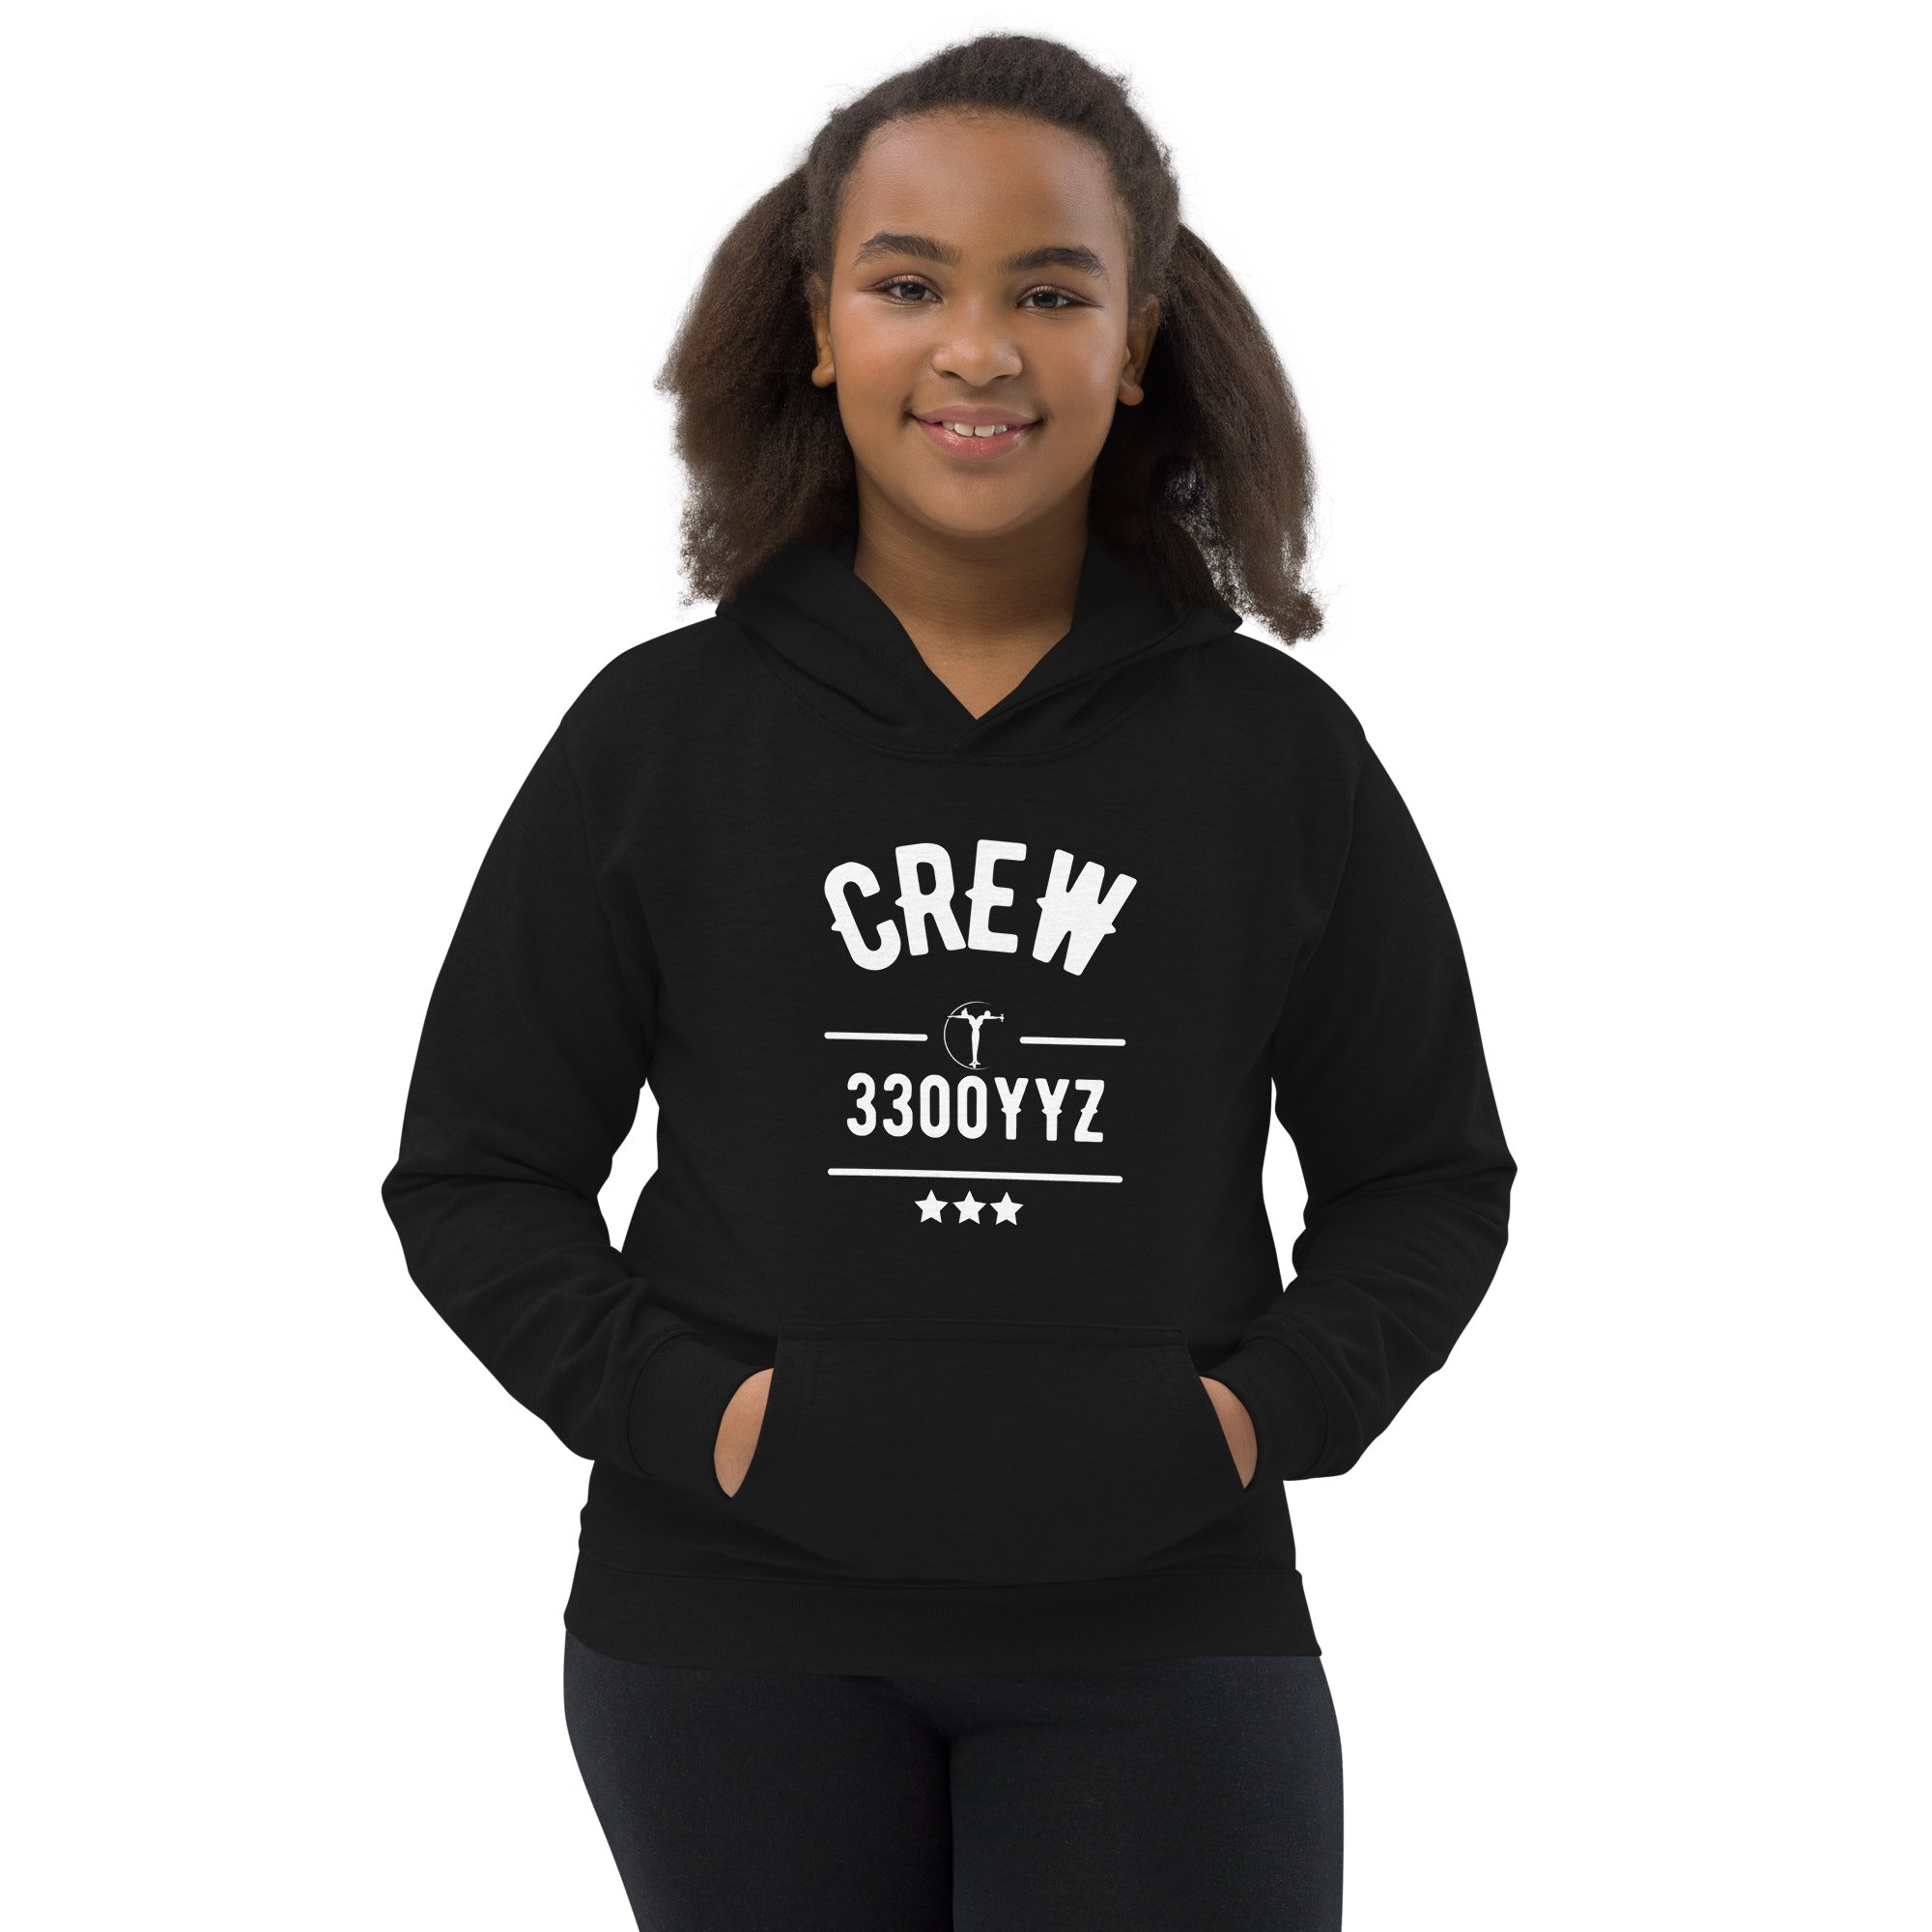 CREW Collection Hoodie - Youth - TandemWear